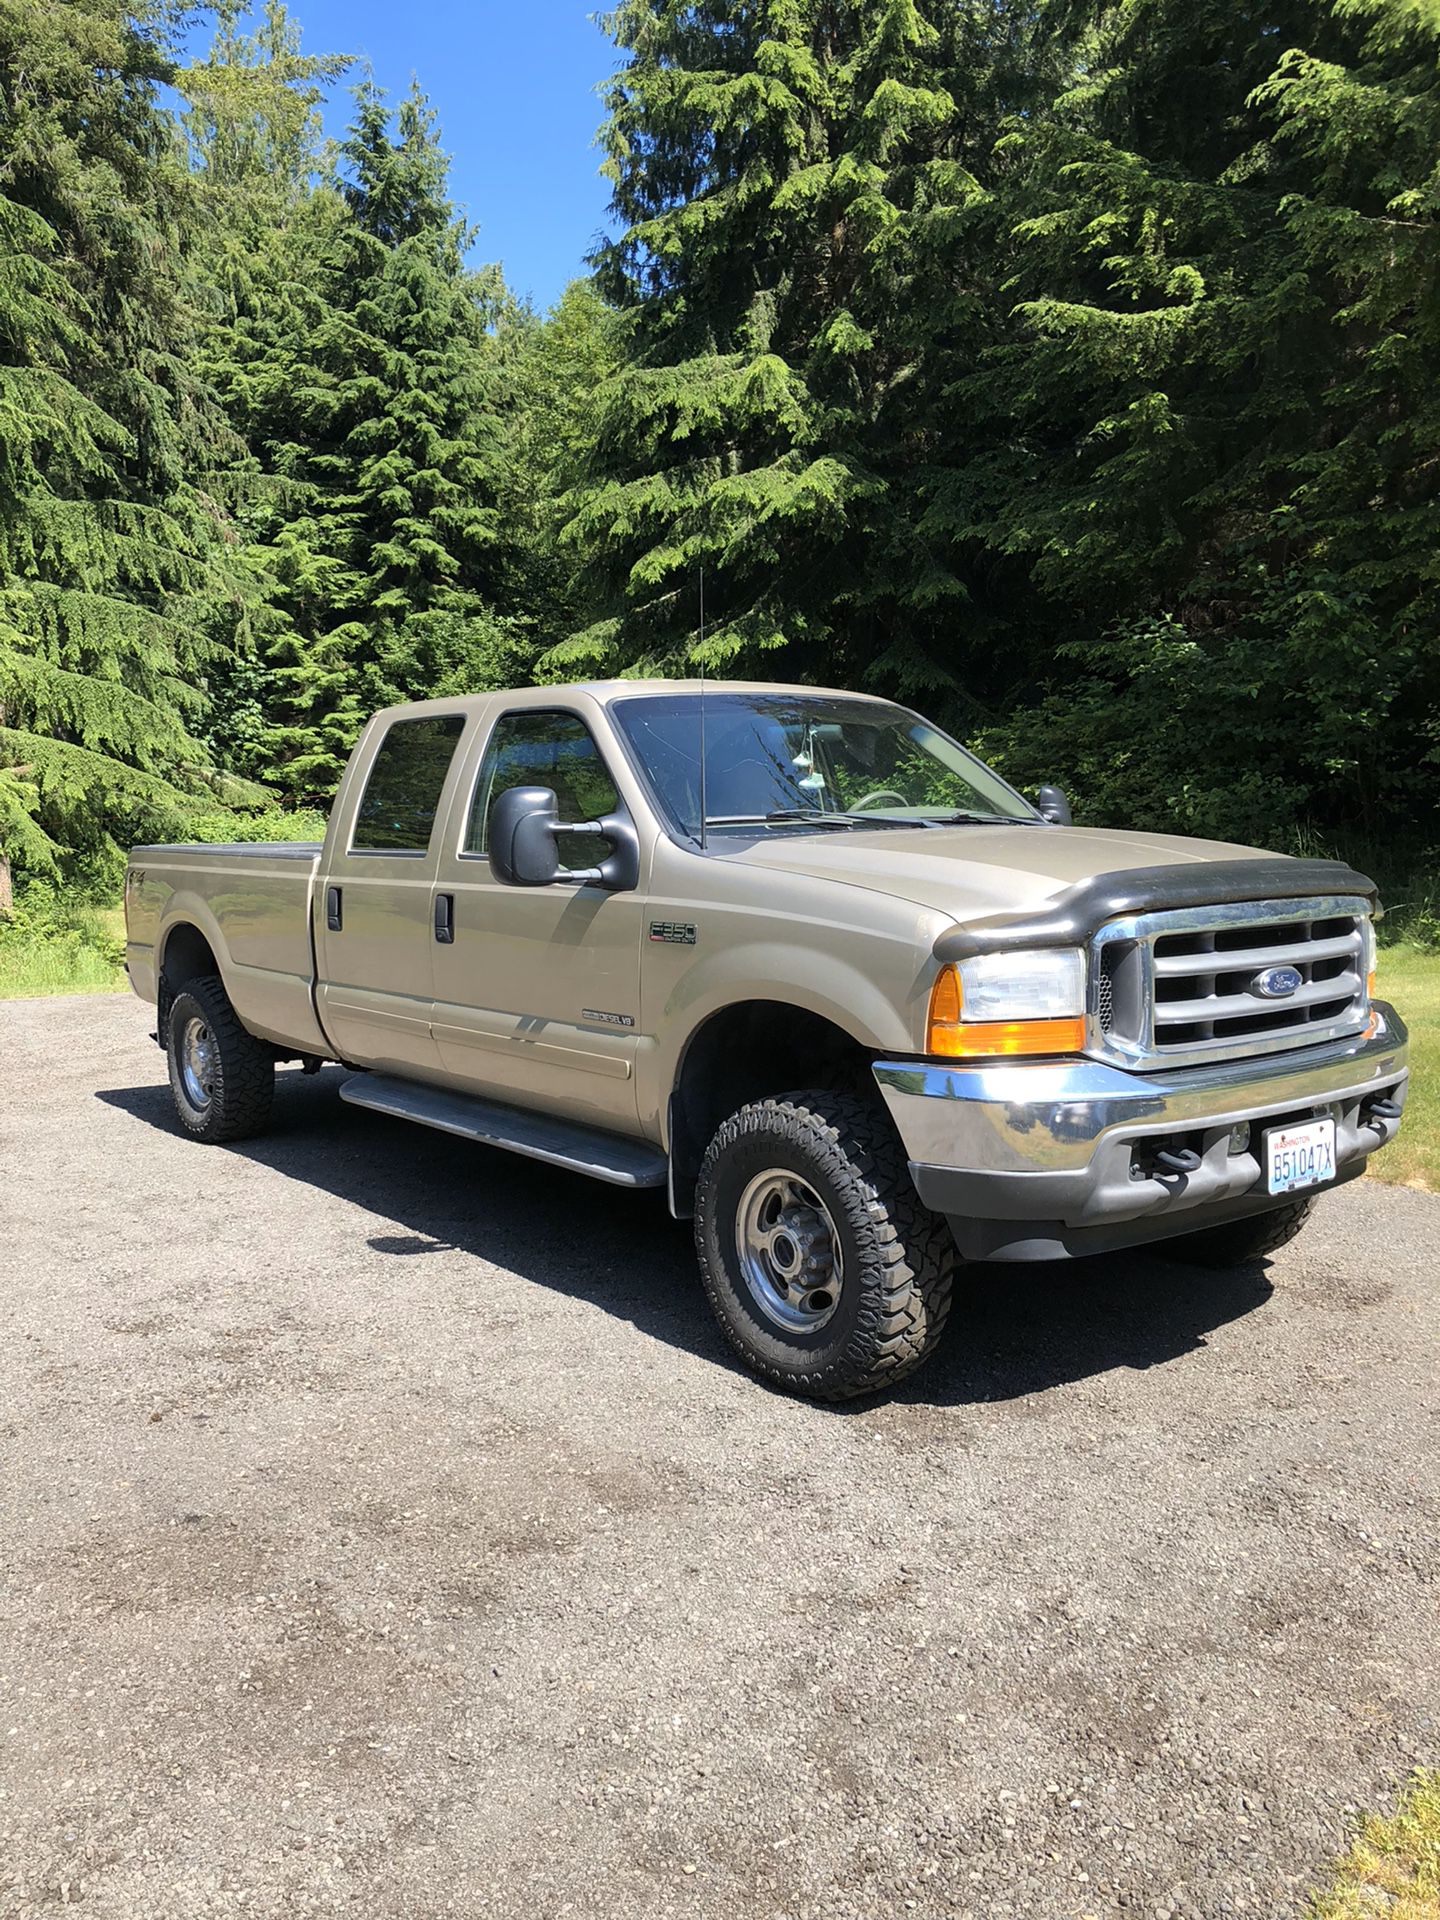 2001 Ford F-350 7.3 Power Stroke Diesel Crew Cab Long bed Lariat